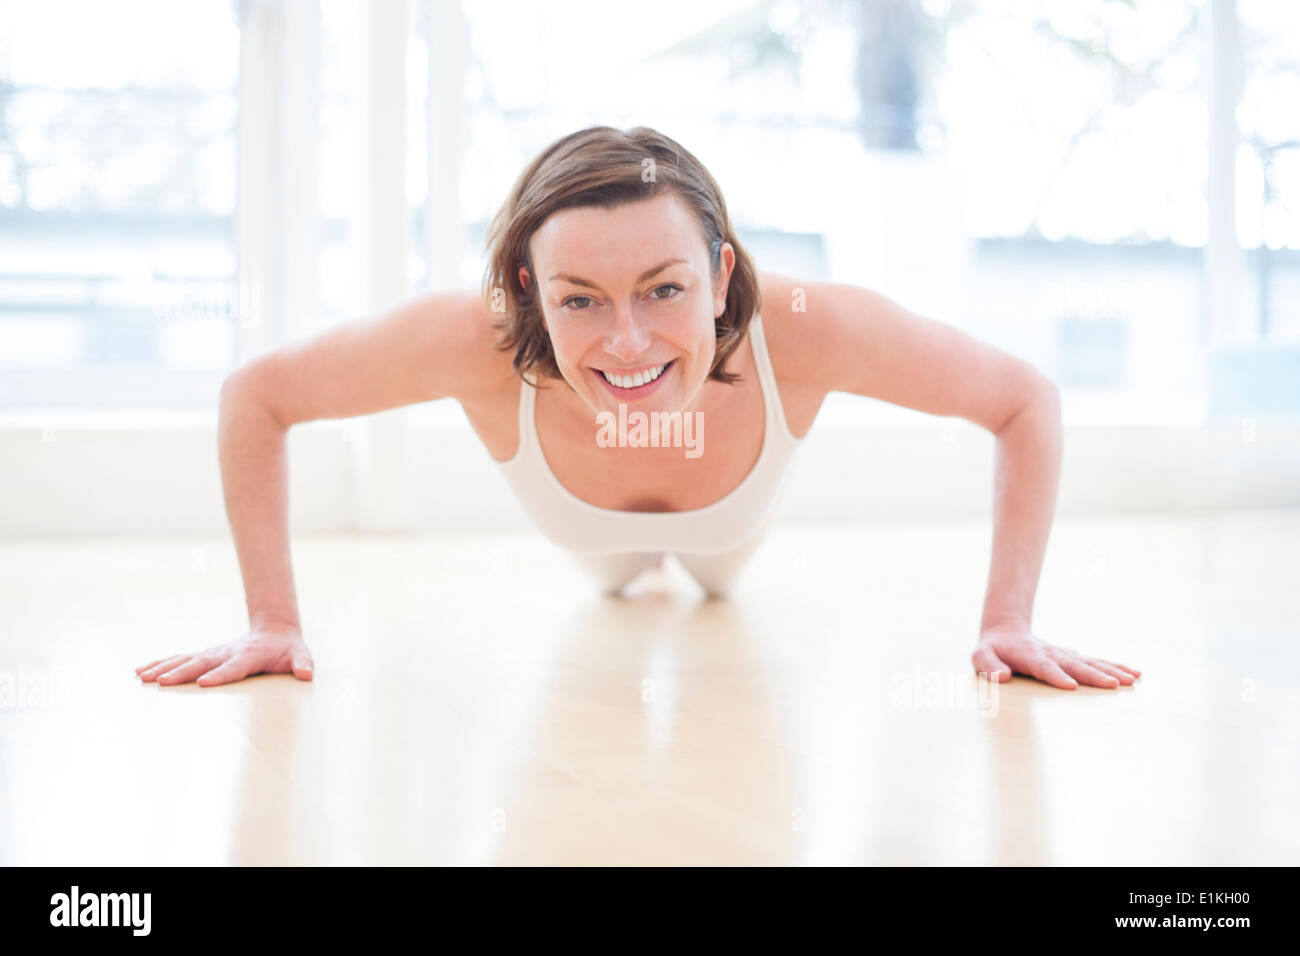 MODEL RELEASED Woman doing press ups front view. Stock Photo